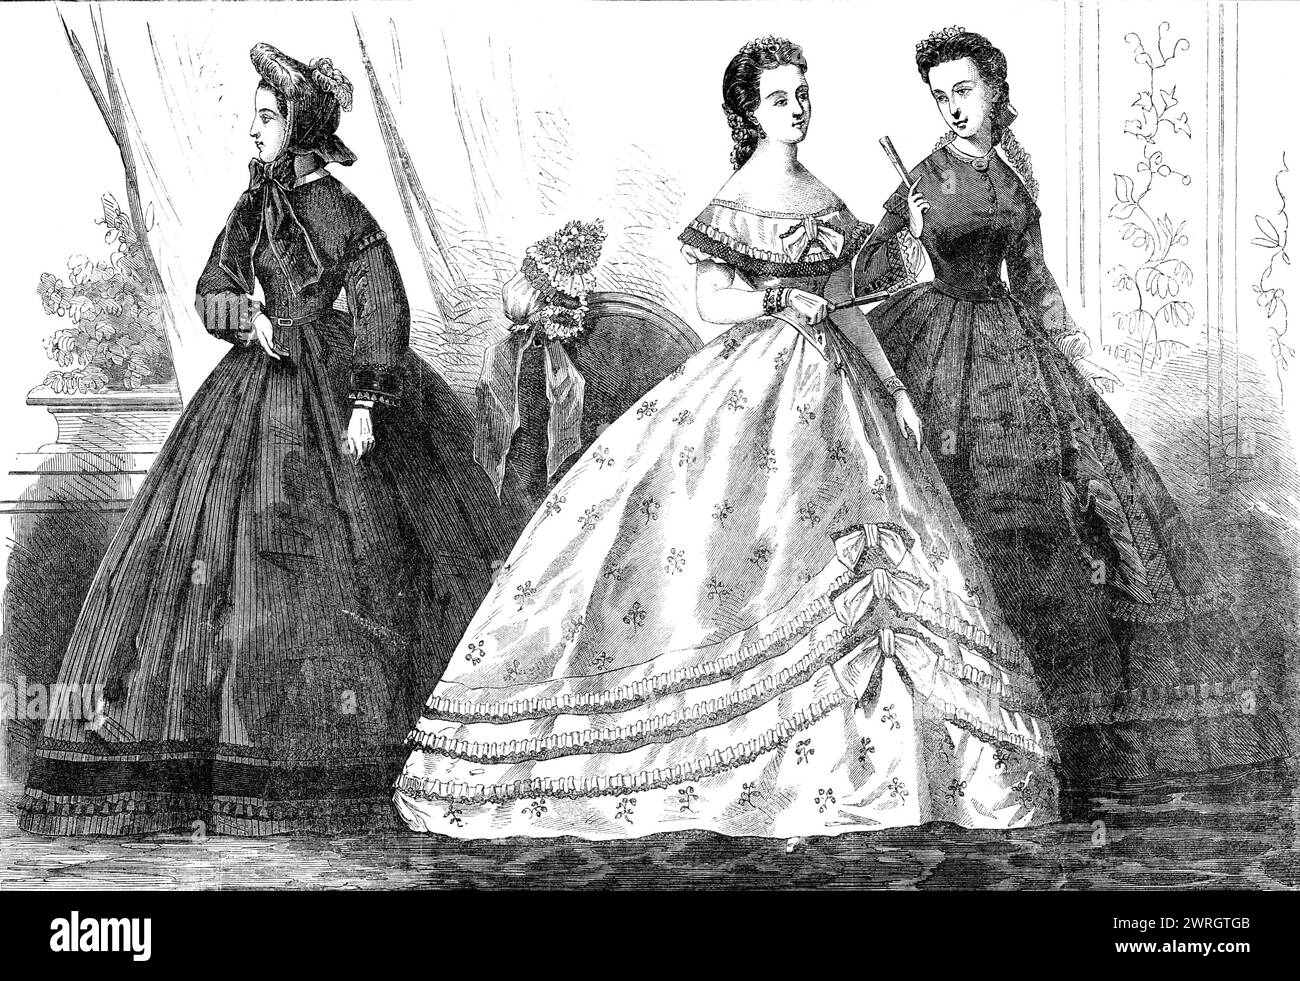 Paris fashions for February, 1864. 'Fig. 1. Walking Dress. Dark brown silk robe, trimmed round the bottom of the skirt with a wide band of black velvet, surmounted by a torsade of chenille and a narrow lace ruching...the trimming of the skirt is completed by a silk ruching of the dress material. The sleeves are ornamented to match. Black velvet bonnet, enlivened on one side with violet feathers. Fig. 2. Ball Dress. This robe is in gros de Tours, of a white ground, with black brocaded flowers; the three fixed flounces are trimmed with a gauze ruching, edged with narrow black lace. Each of the f Stock Photo